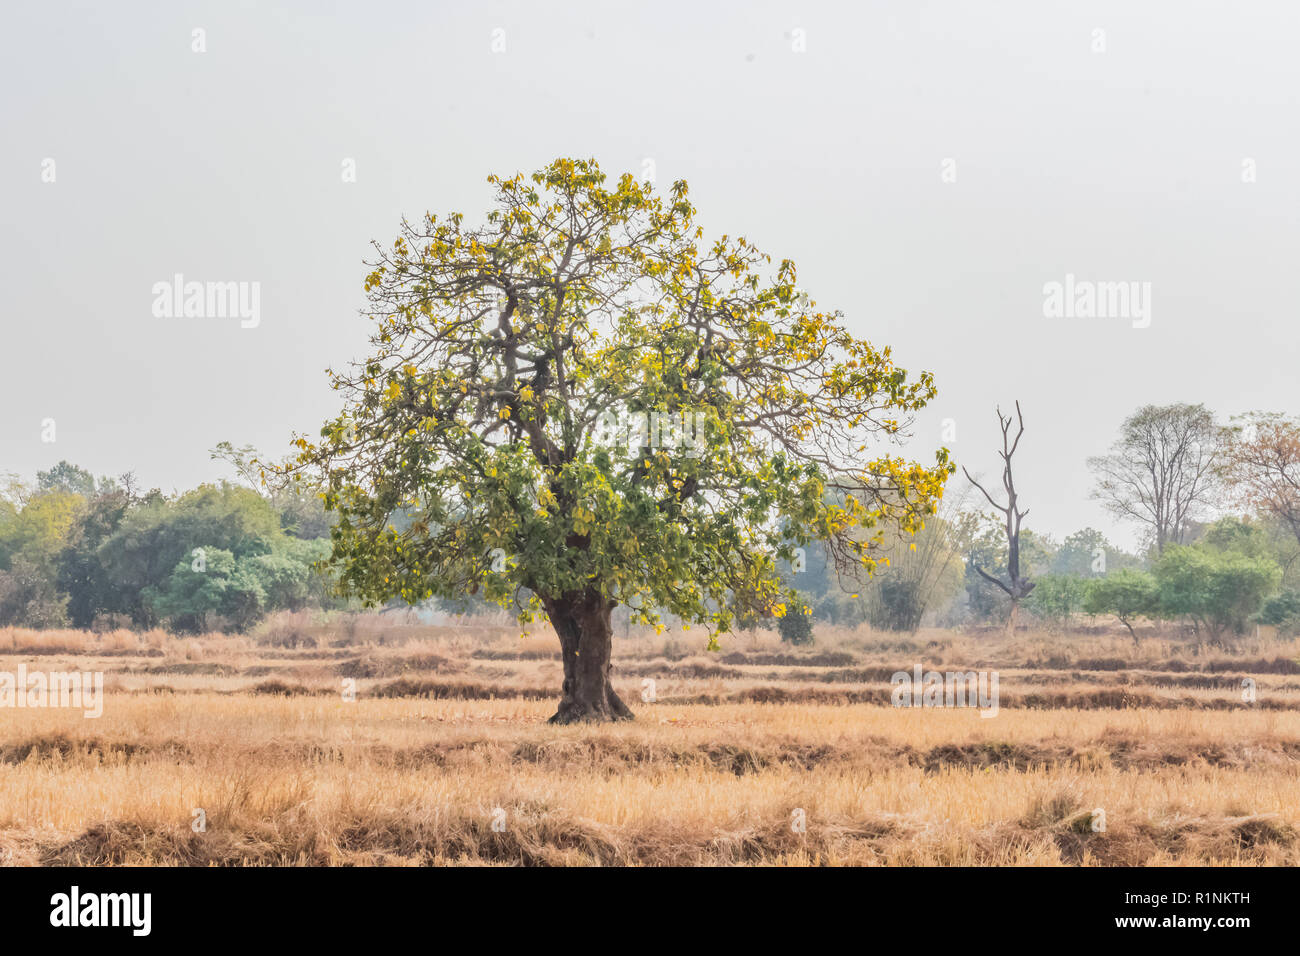 An Indian tree mahuaa close view background of a mountain looking awesome. Stock Photo